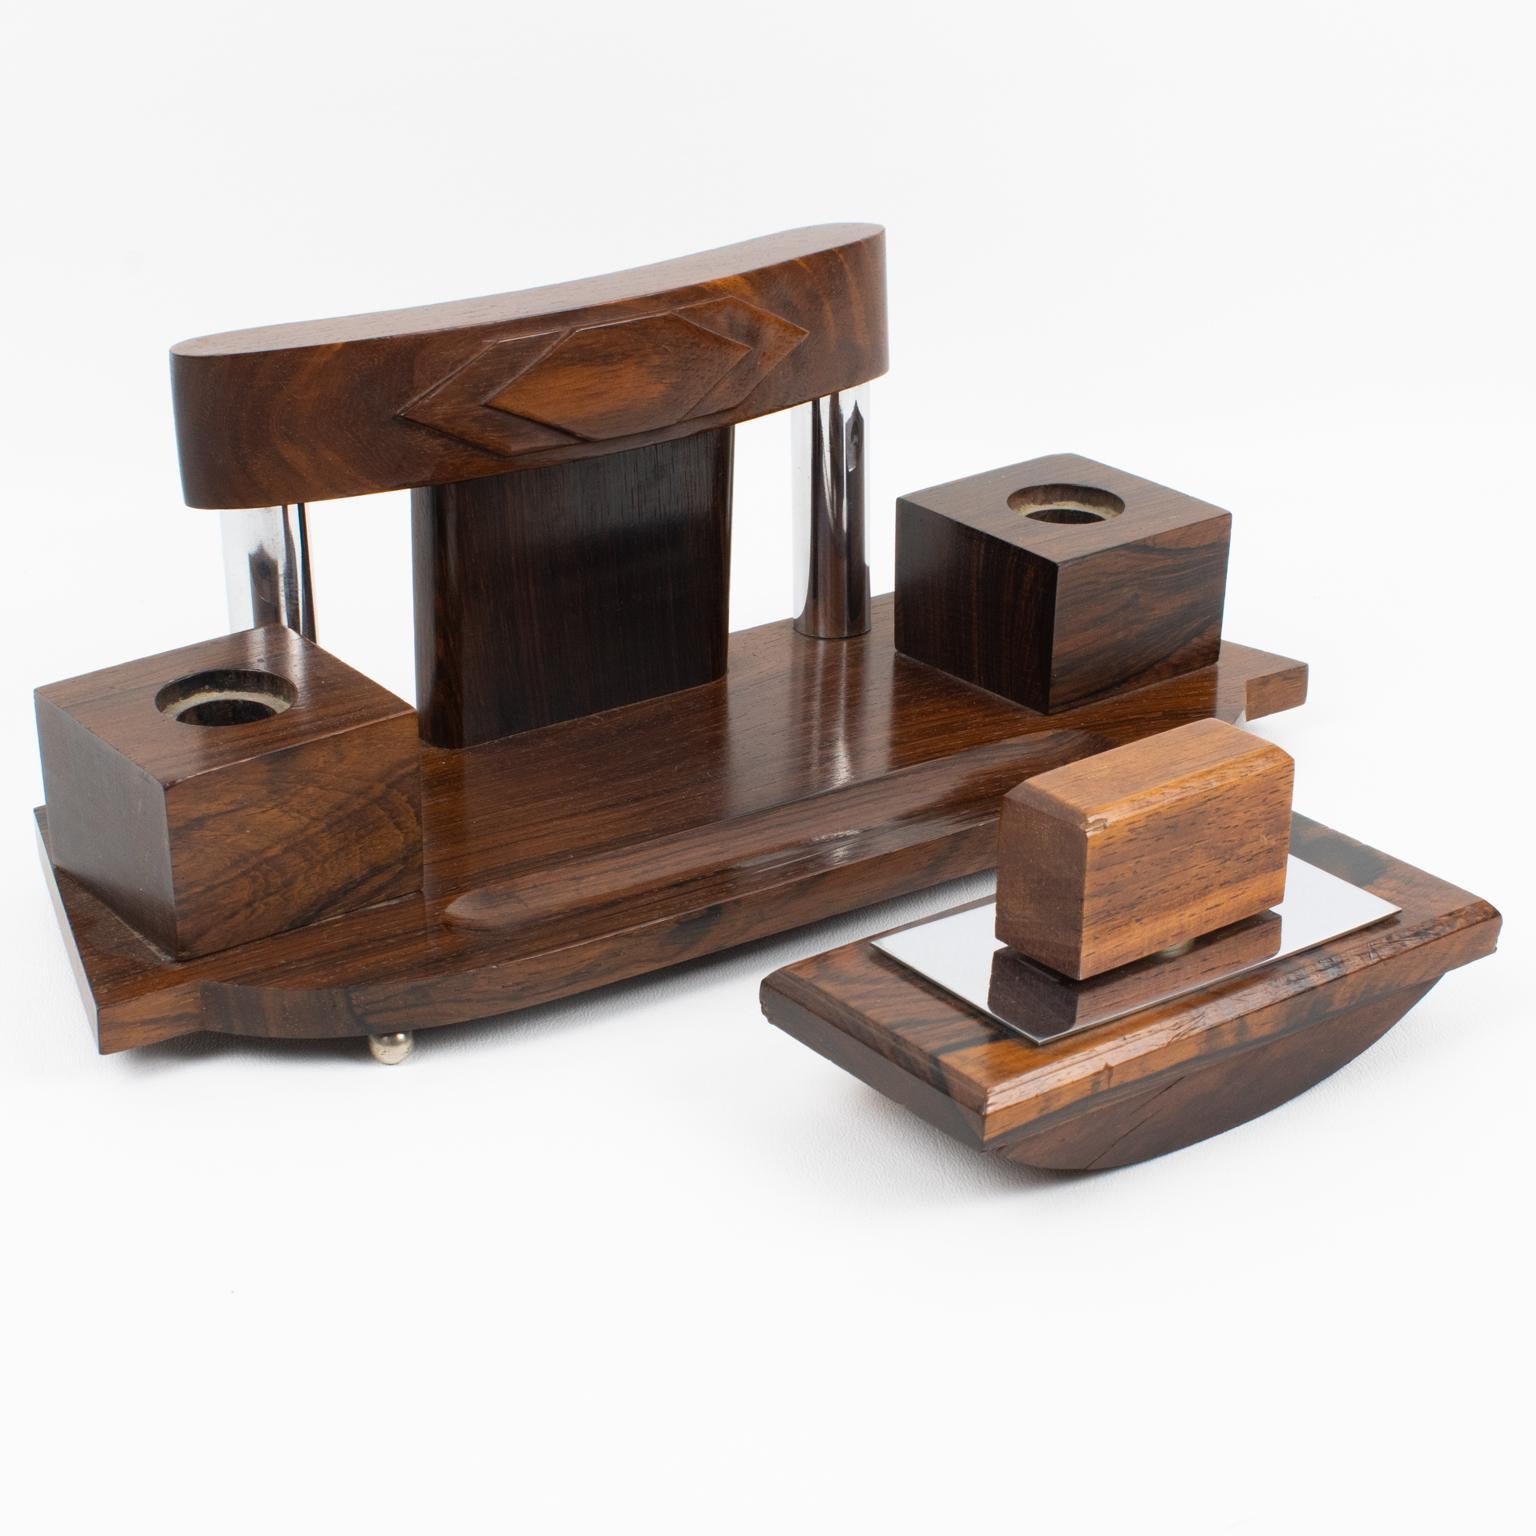 This gorgeous Art Deco modernist desk accessory set was produced in France in the 1930s. The set is built with a double inkwell and a matching blotter. The sleek geometric shape has carved and shaped Macassar wood main body and chromed metal